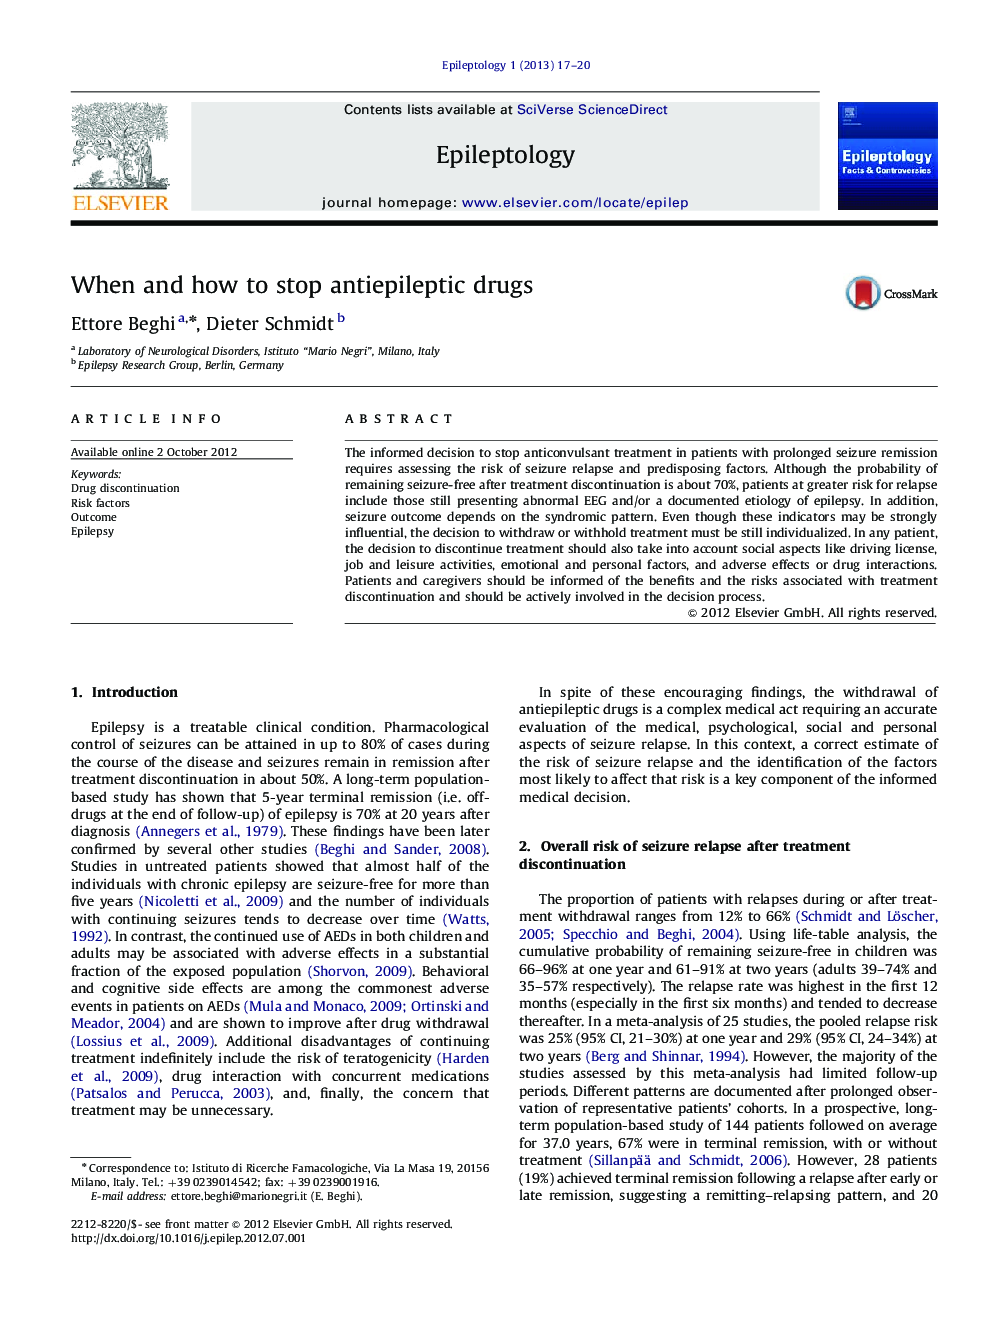 When and how to stop antiepileptic drugs